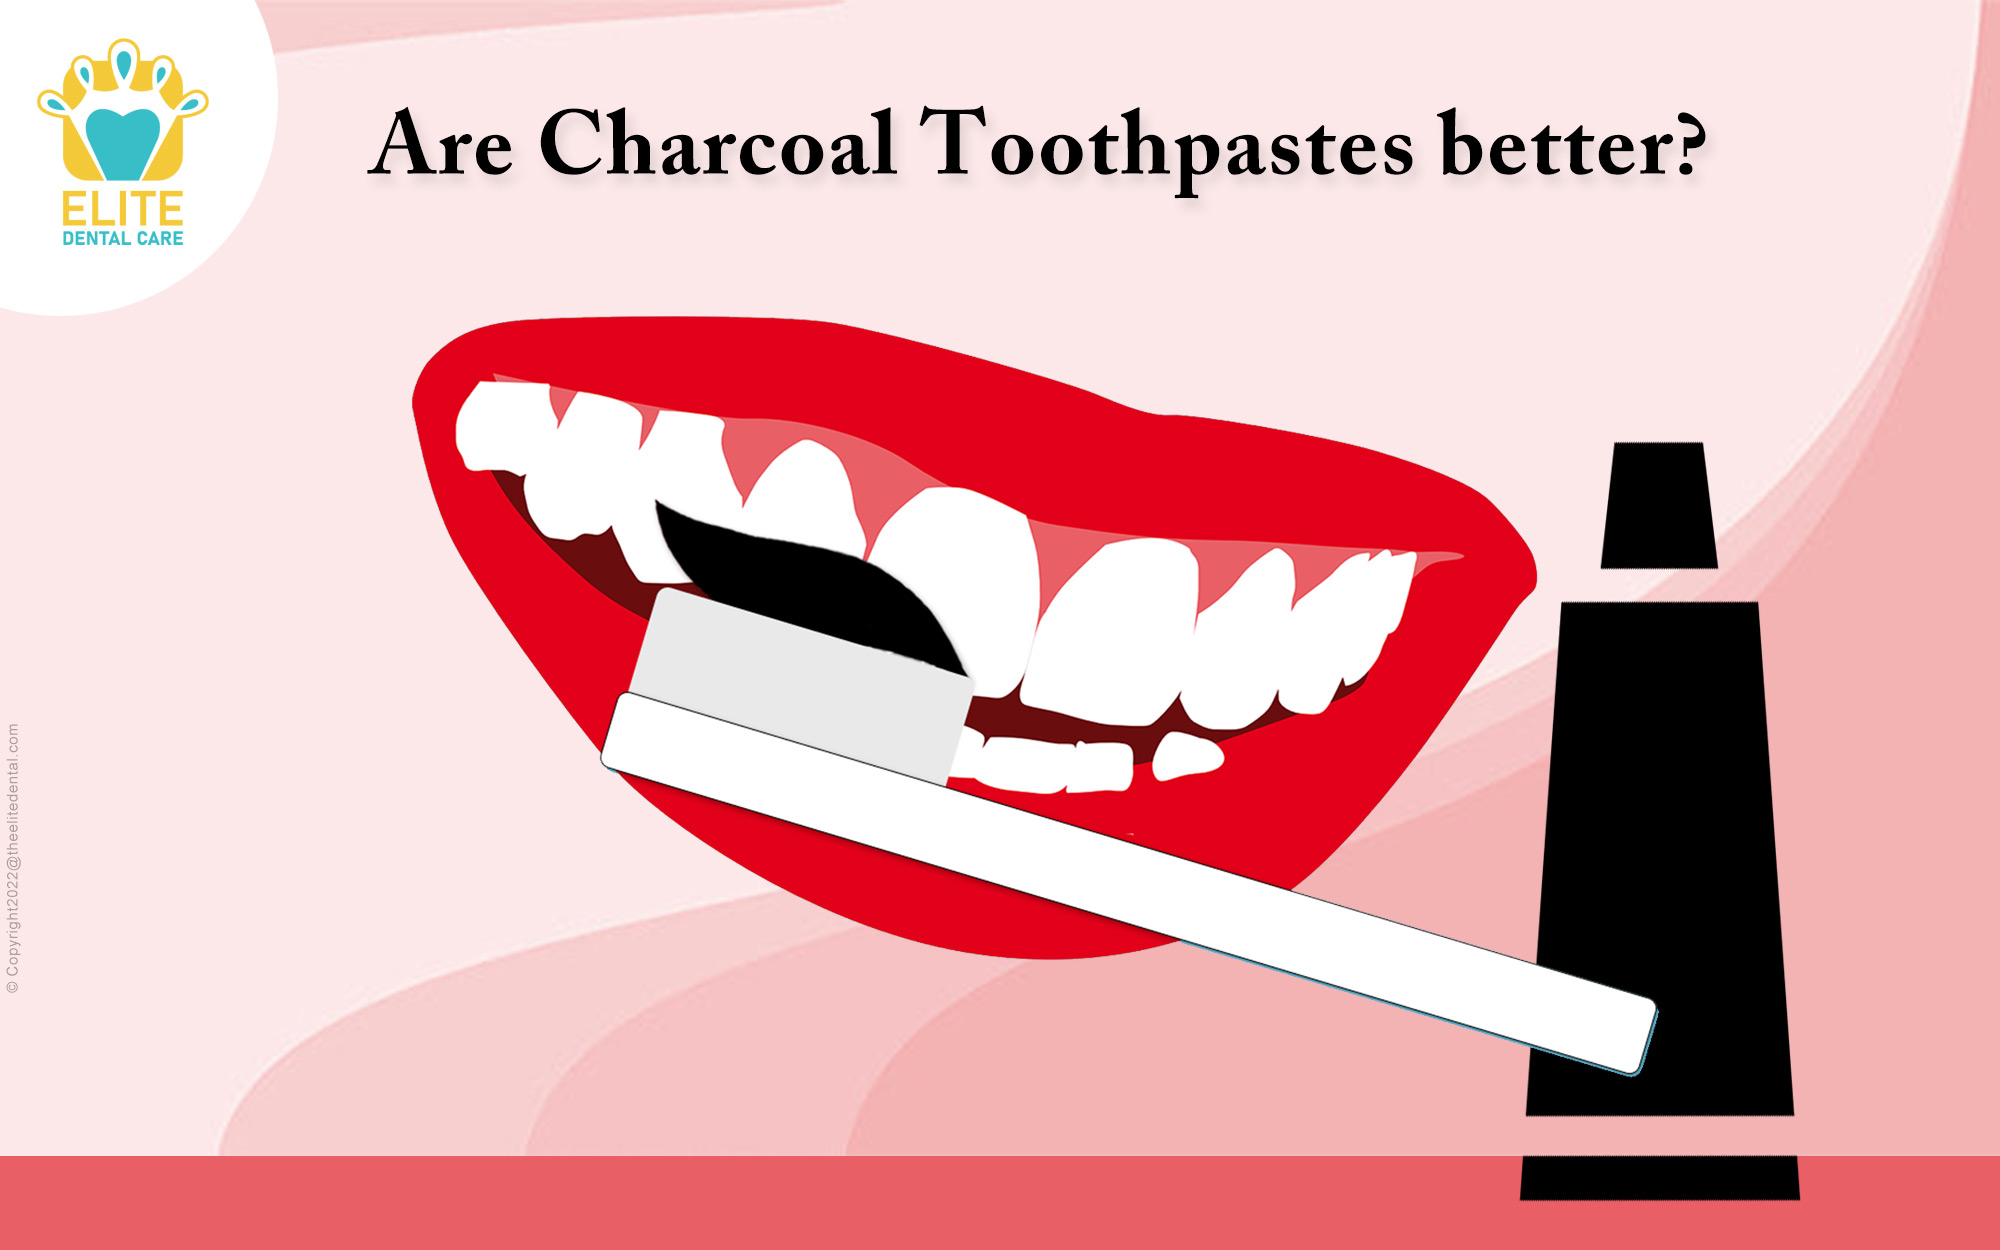 Are Charcoal Toothpastes Better?